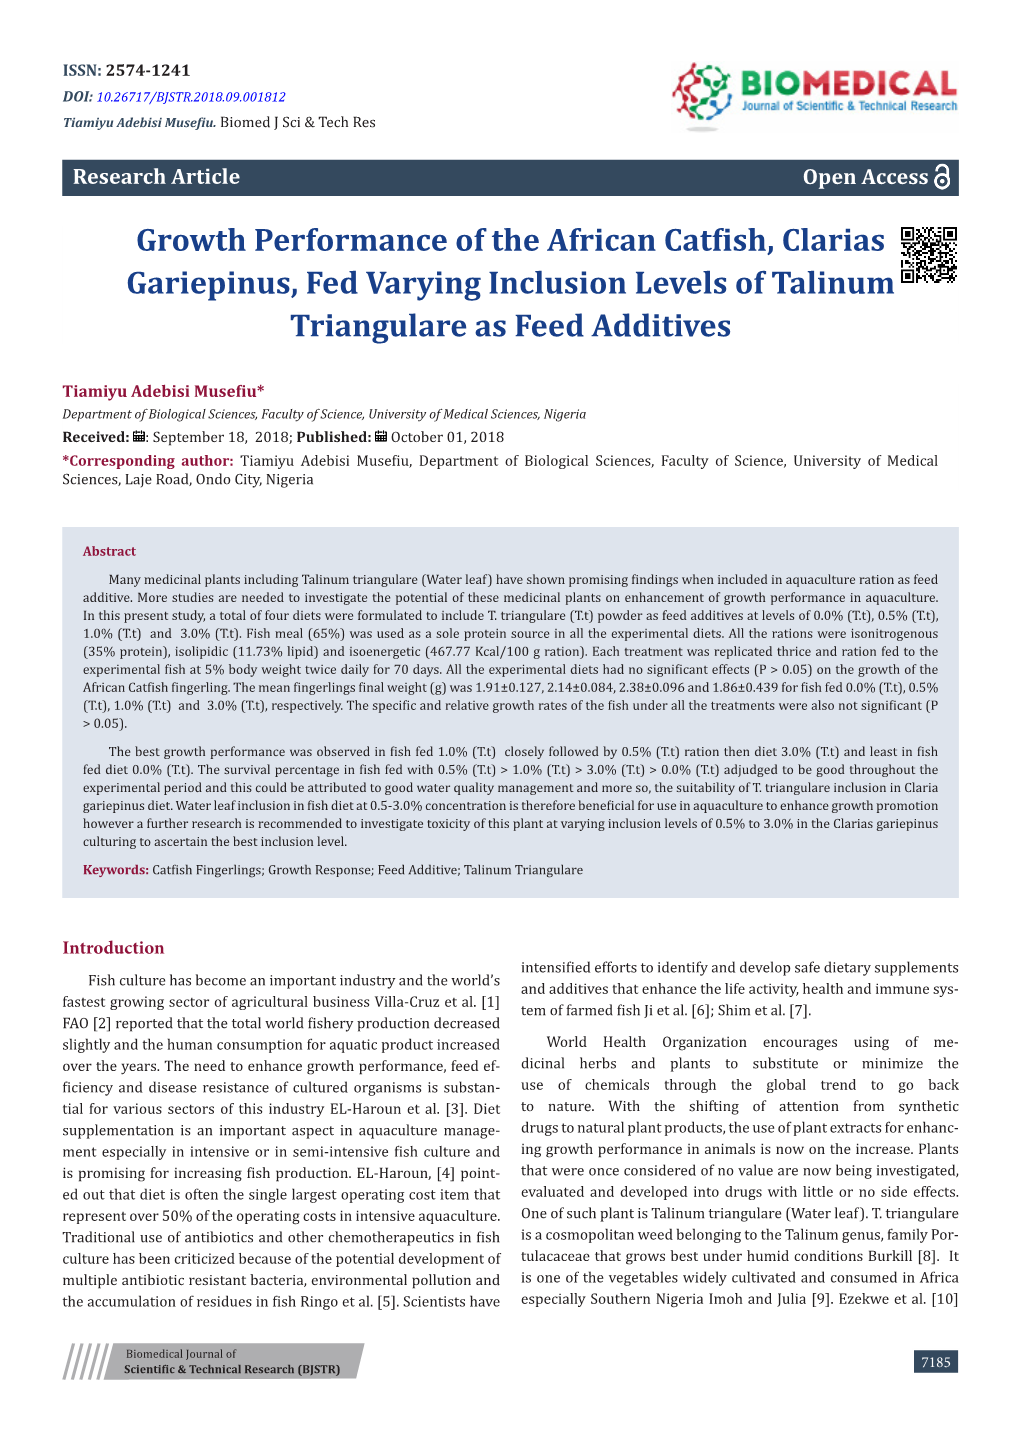 Growth Performance of the African Catfish, Clarias Gariepinus, Fed Varying Inclusion Levels of Talinum Triangulare As Feed Additives